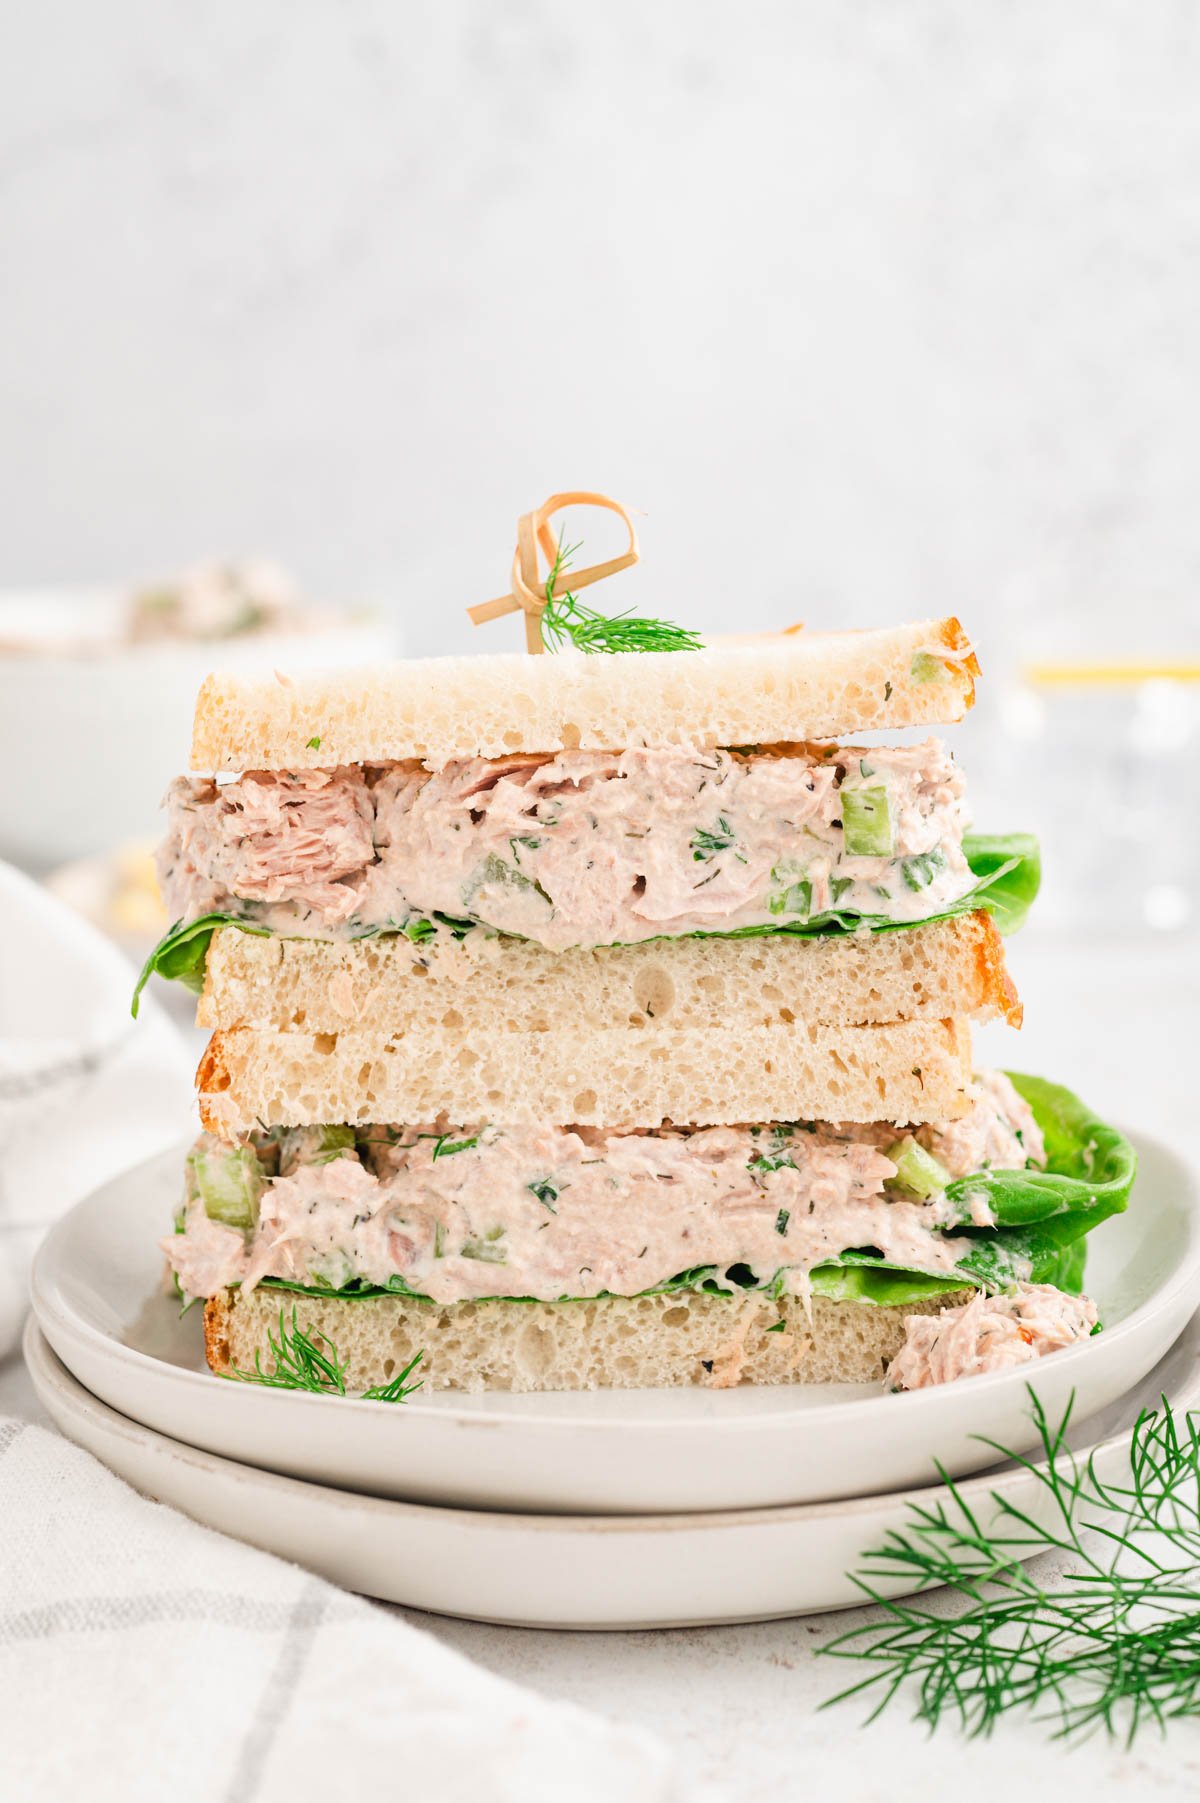 Tuna salad sandwich, with the two halves stacked on a white plate.